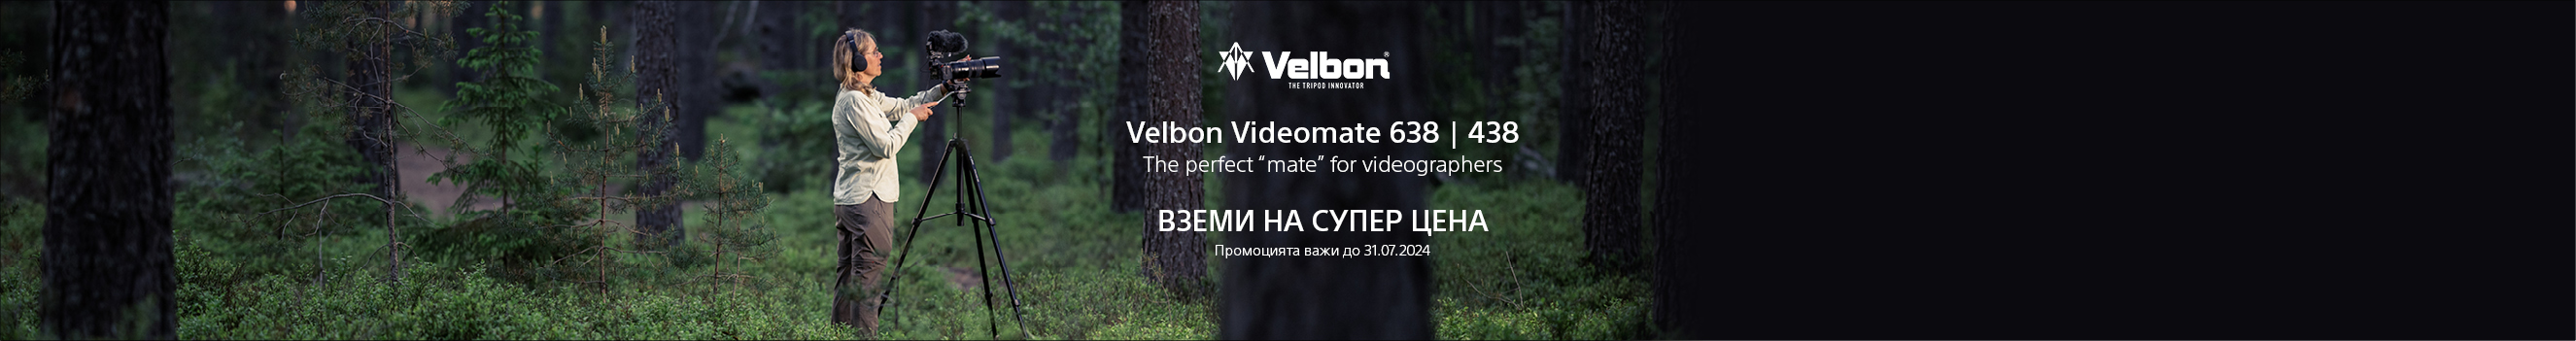  Get Velbon Videomate 483 and Videomate 638 at a great price until 31.07